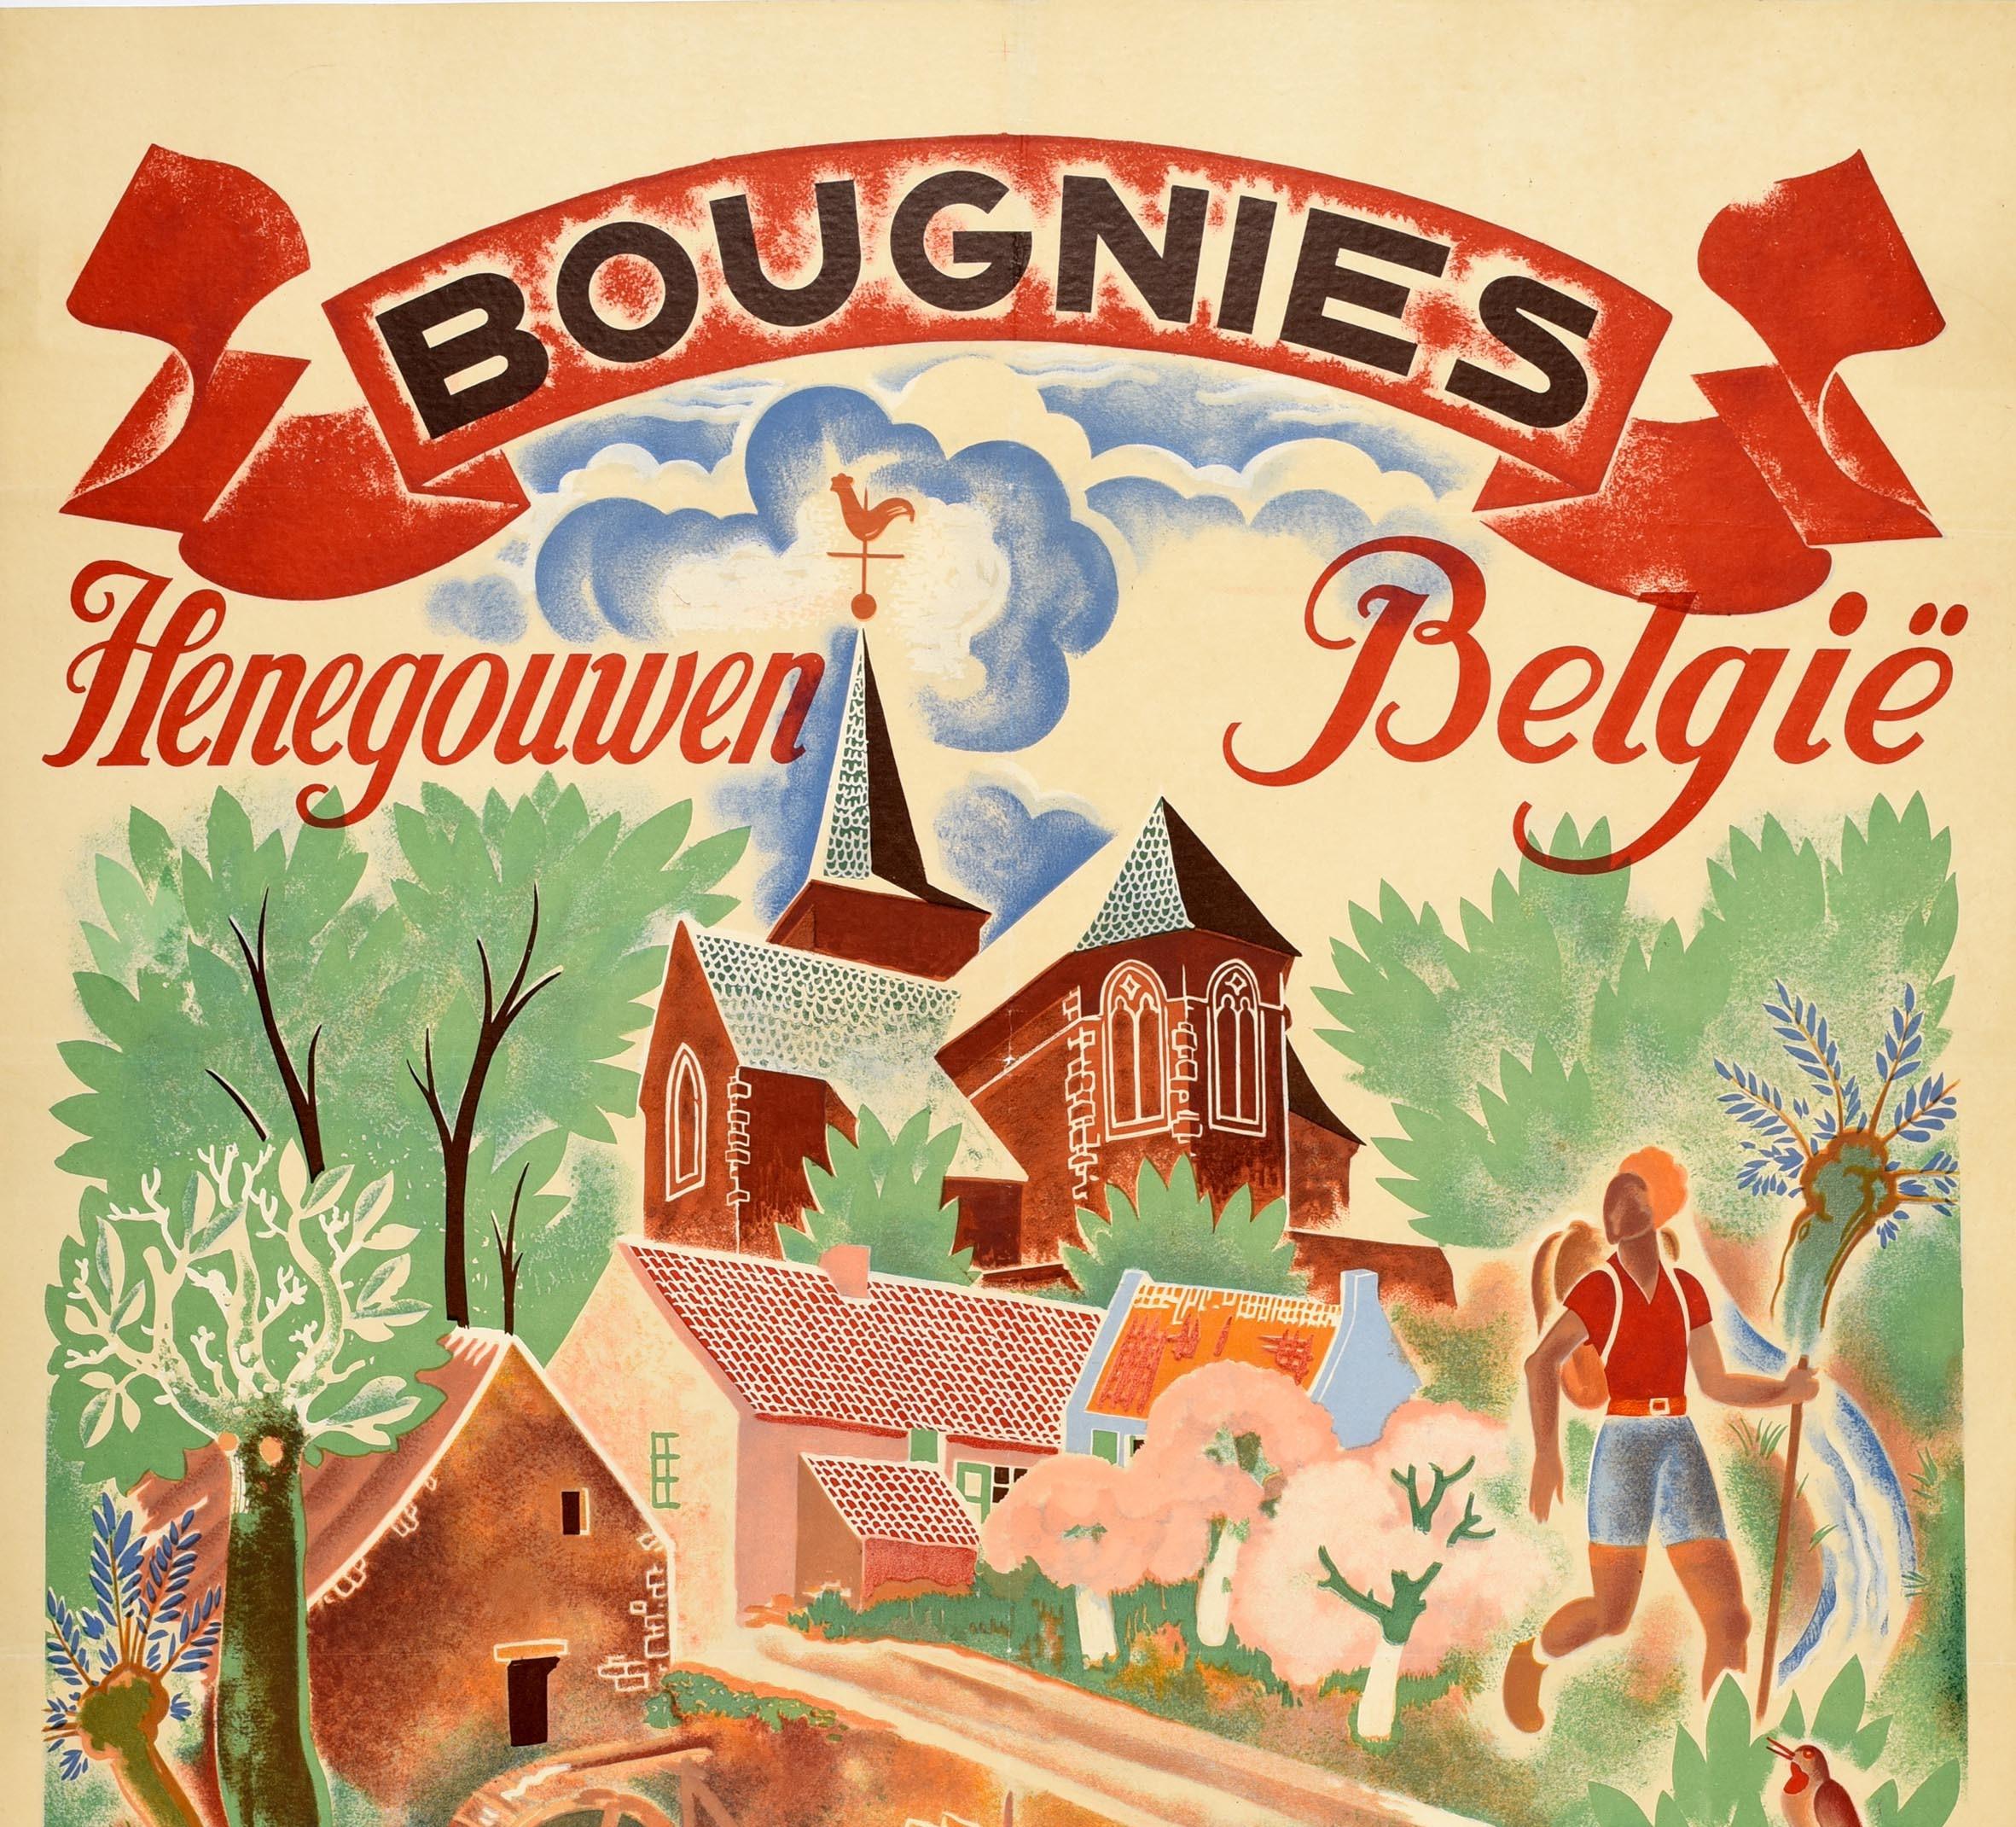 Original vintage travel poster for Bougnies Henegouwen Belgie in the Southern Henegouwen region of Belgium featuring colourful Nervia style artwork depicting a man fishing and a lady sunbathing and reading peacefully by flowers and birds in a tree